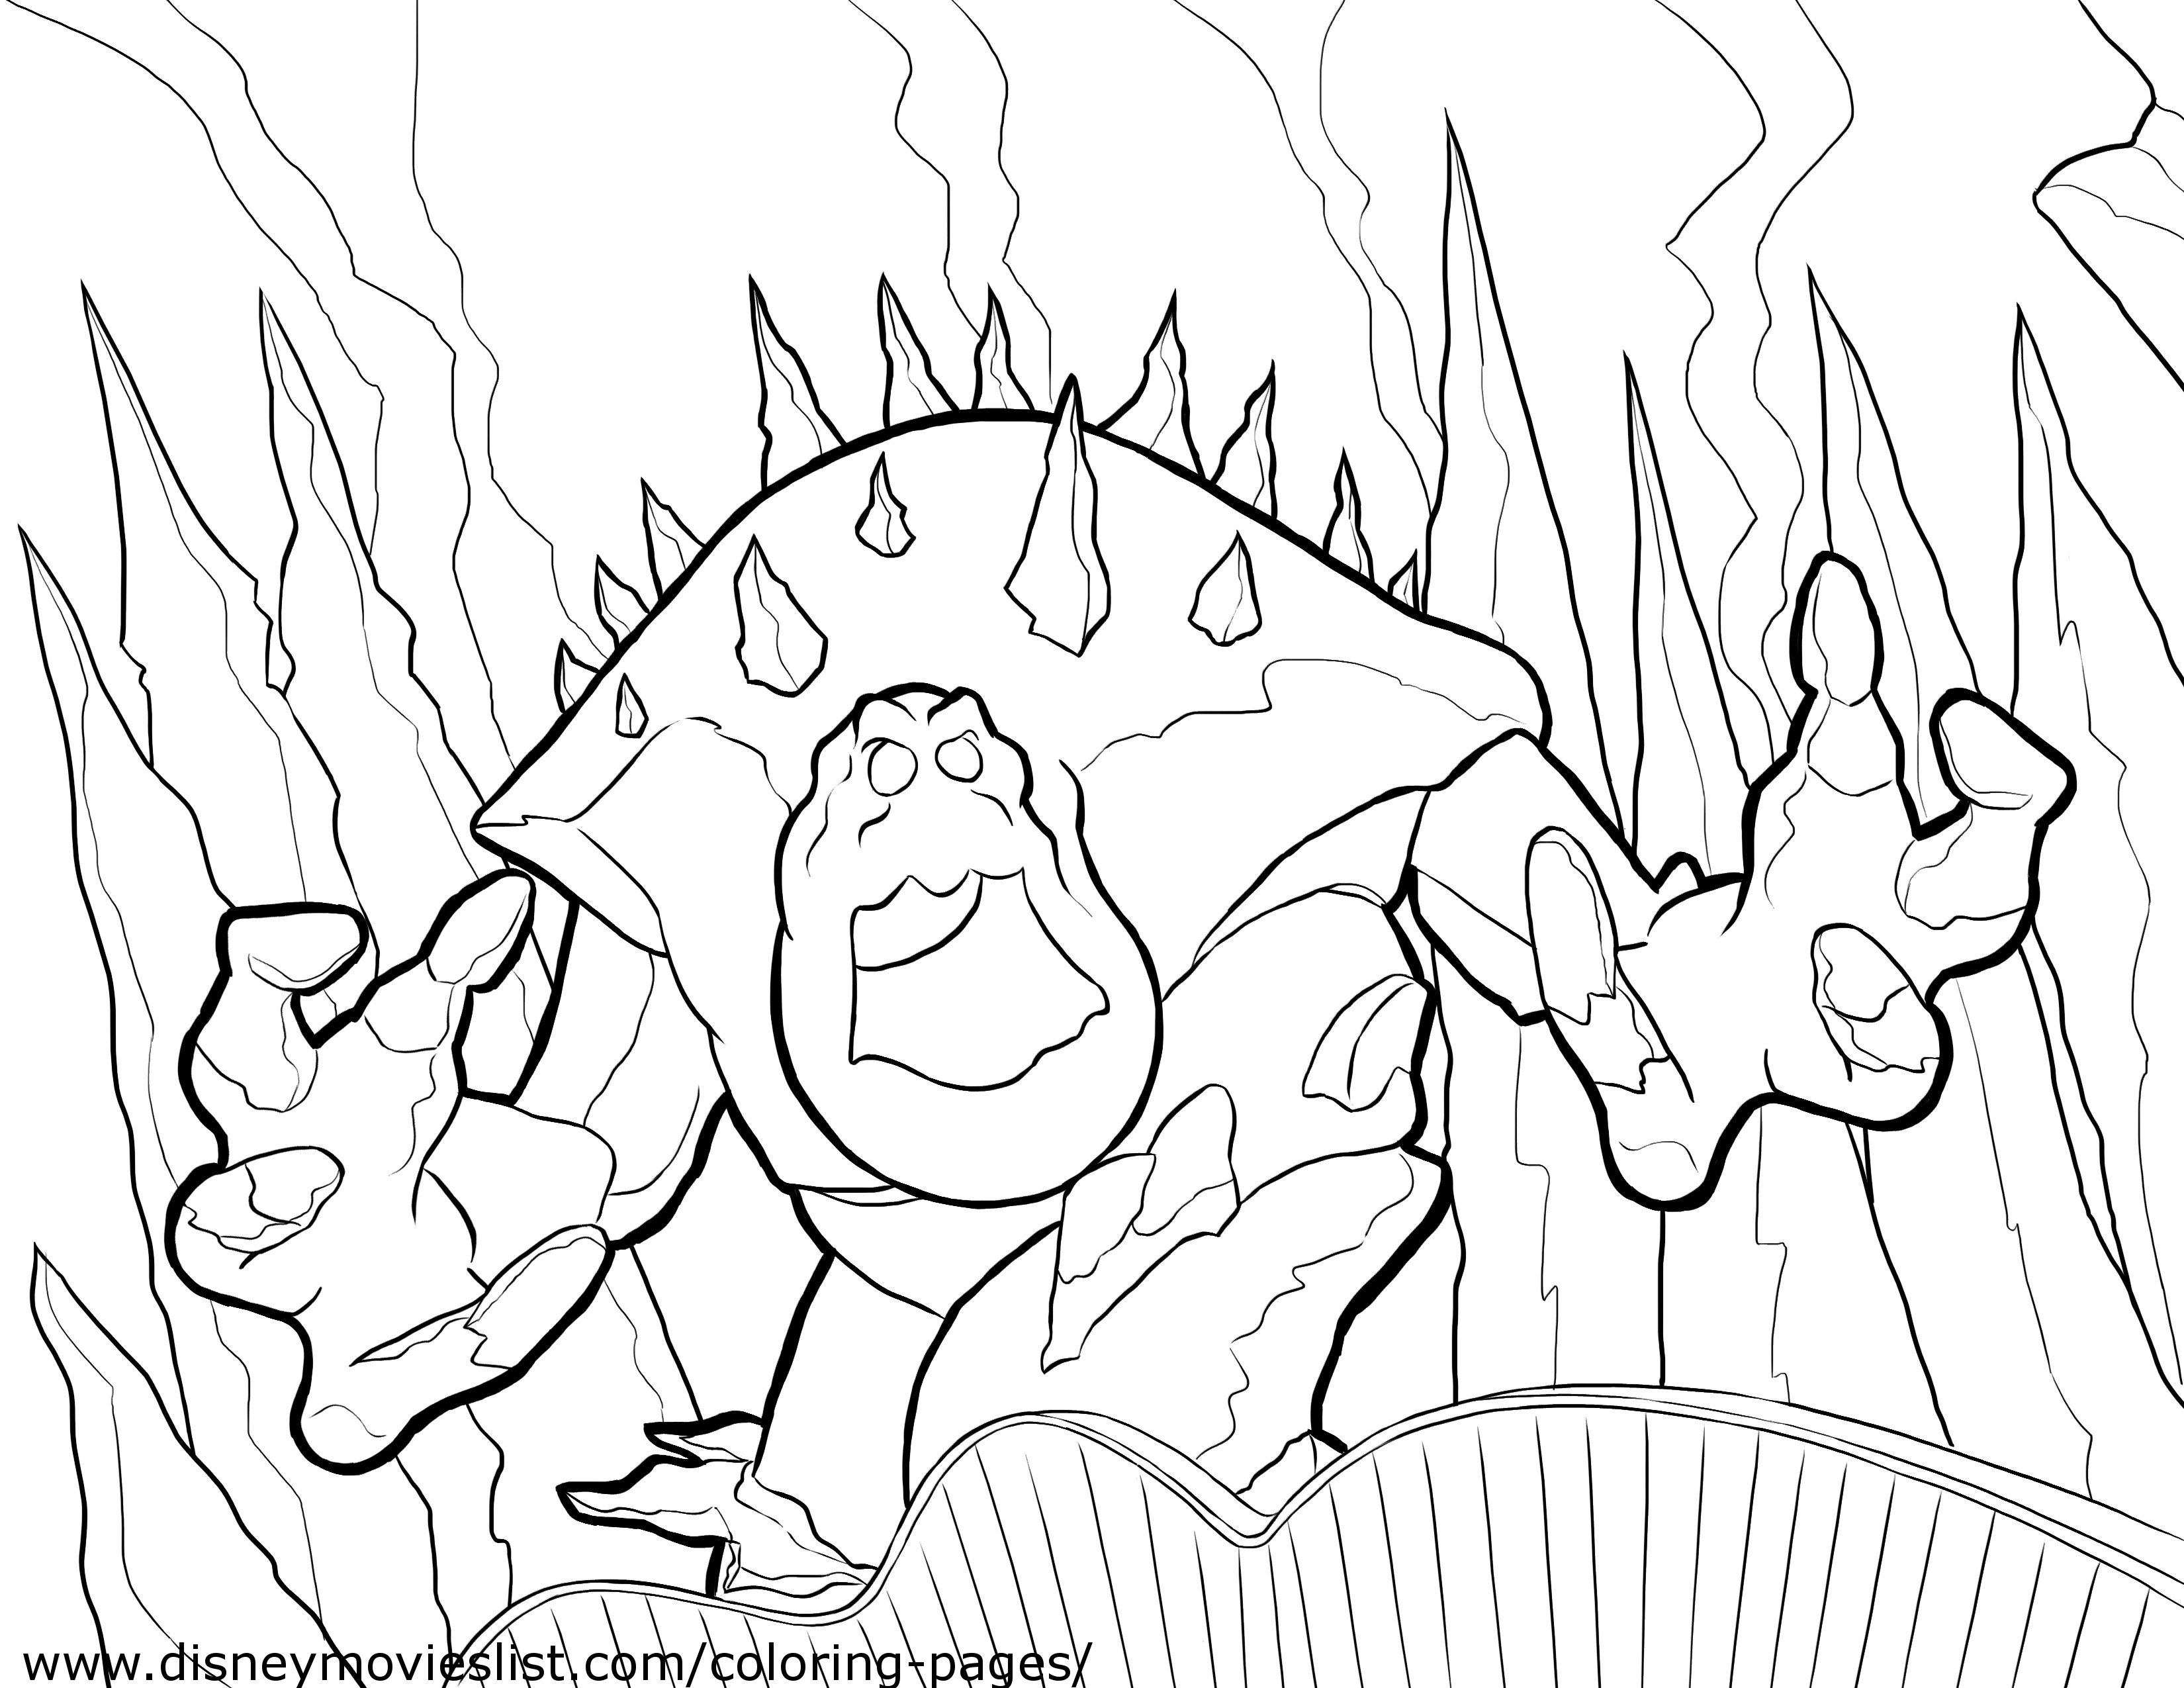  Frozen Coloring Pages | Color pages | FREE coloring pages for kids |Printable coloring pages for kids| #21